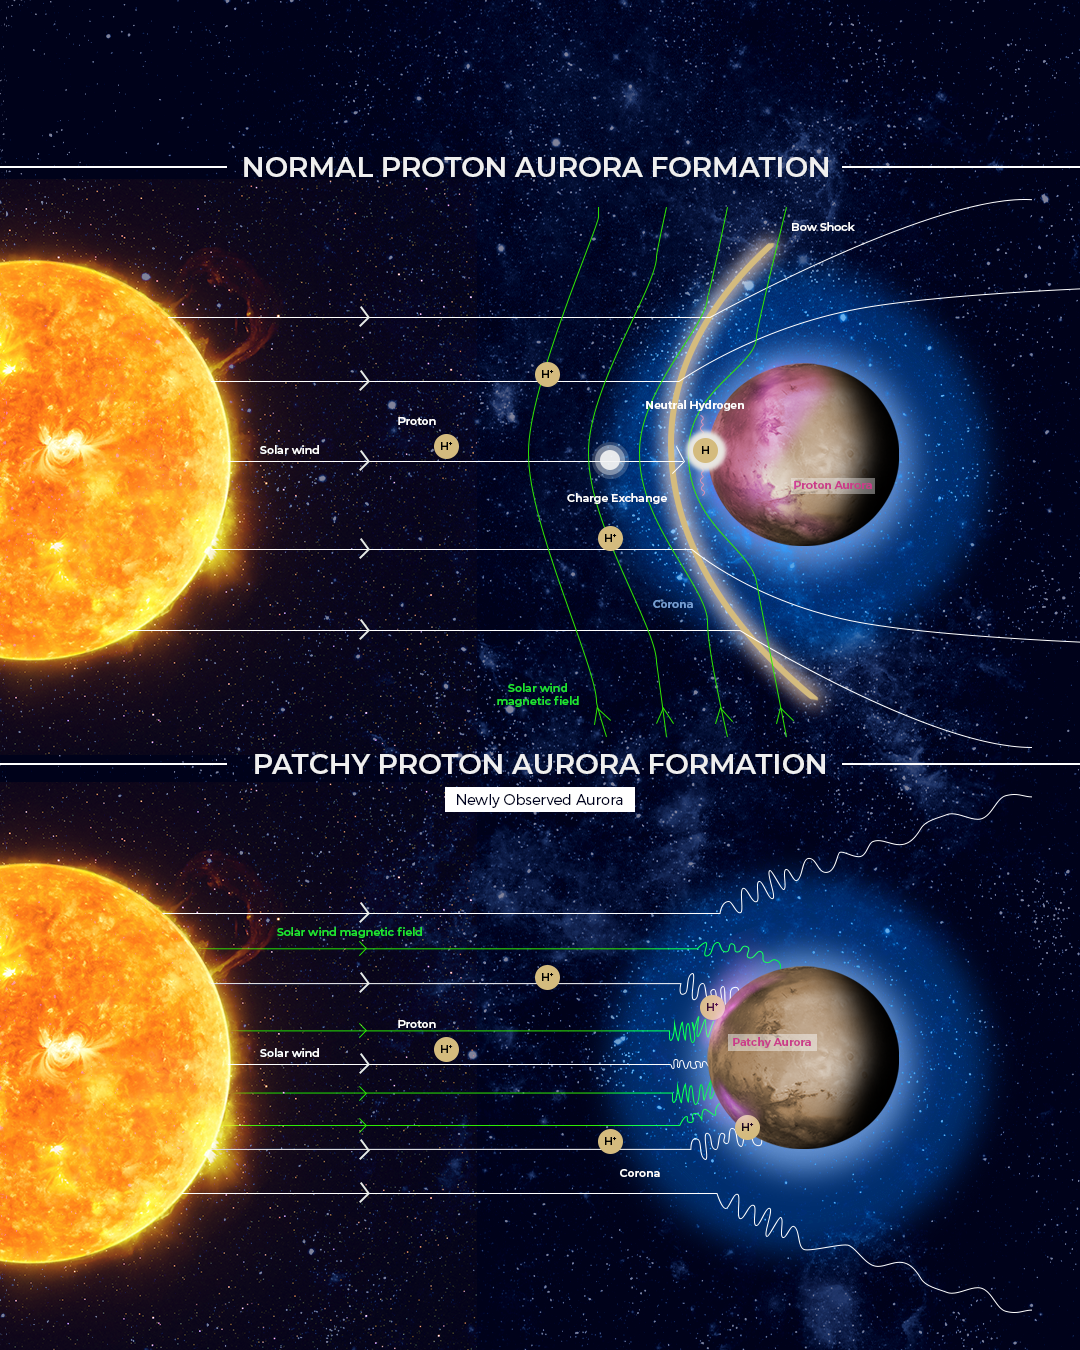 Comparison of normal and patchy proton aurora formation mechanisms at Mars. Top image shows the normal proton aurora formation mechanism first discovered in 2018. White lines show that solar wind protons traveling away from the Sun are normally swept around the planet by the Mars magnetosphere, and don't directly interact with the atmosphere. When proton aurora occur, a small fraction of the solar wind collides with Mars hydrogen in the extended corona of the planet (shown in blue), and charge exchanges into neutral H atoms. These newly created H atoms are still travelling at the same speed, and are no longer sensitive to the magnetospheric forces that redirect protons around the planet. Instead, the energetic H atoms slam directly into the upper atmosphere of Mars and collide multiple times with the neutral atmosphere, resulting in auroral emission by the incident H atoms (purple). Because the solar wind and Mars corona are uniform across the planet, the aurora occurs everywhere on the planet's day side with a uniform brightness. Bottom image shows the newly discovered formation mechanism for patchy proton aurora. Green lines in the top image show that under normal conditions the solar wind magnetic field drapes nicely around the planet. By contrast, patchy proton aurora form during unusual circumstances when the solar wind magnetic field is aligned with the proton flow. Under such conditions the typical draped magnetic field configuration is replaced by a highly variable patchwork of plasma structures, and the solar wind is able to directly impact the planet's upper atmosphere in specific locations that depend on the structure of the turbulence. When incoming solar wind protons collide with the neutral atmosphere, they can be neutralized and emit aurora in localized patches. During such times patchy proton aurora forms a map of the locations where solar wind plasma is directly impacting the planet. Image Credit: Emirates Mars Mission/UAE Space Agency